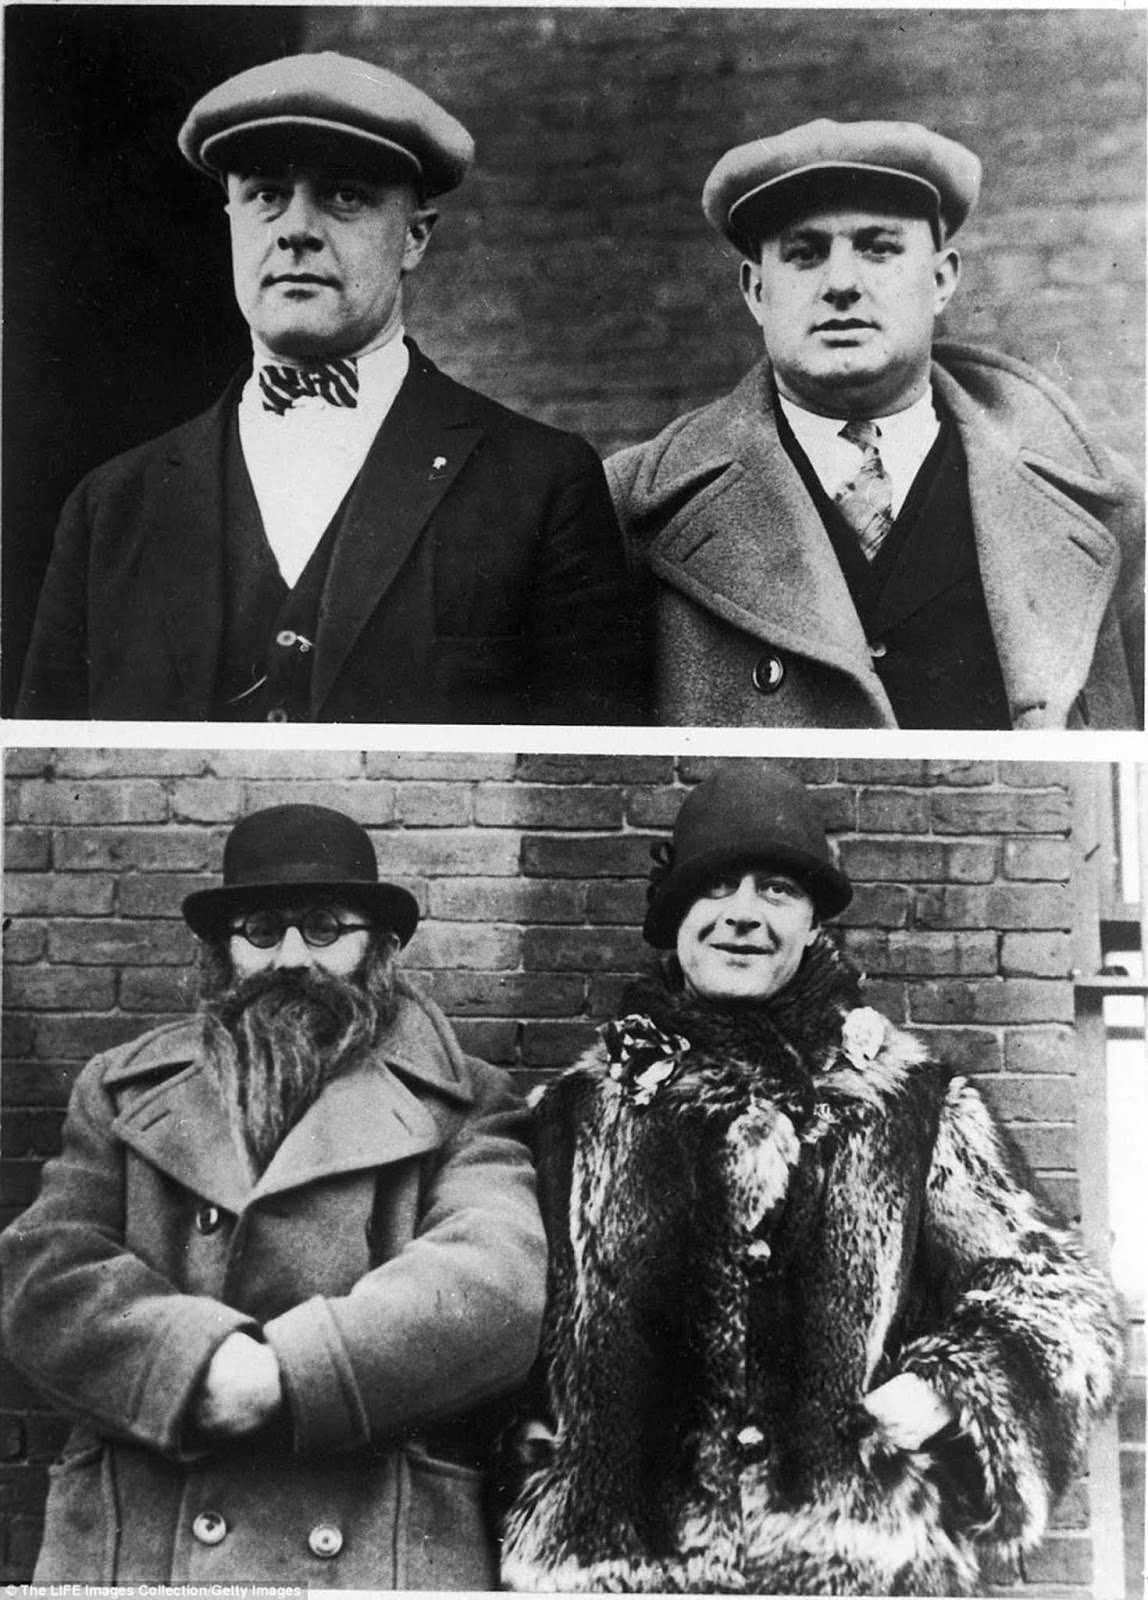 Prohibition-era policemen Moe Smith (on the left in top picture, on the right on the bottom picture) and Izzy Einstein (on the right in the top picture, on the left in the bottom picture). The pair would use disguises to infiltrate speakeasies.